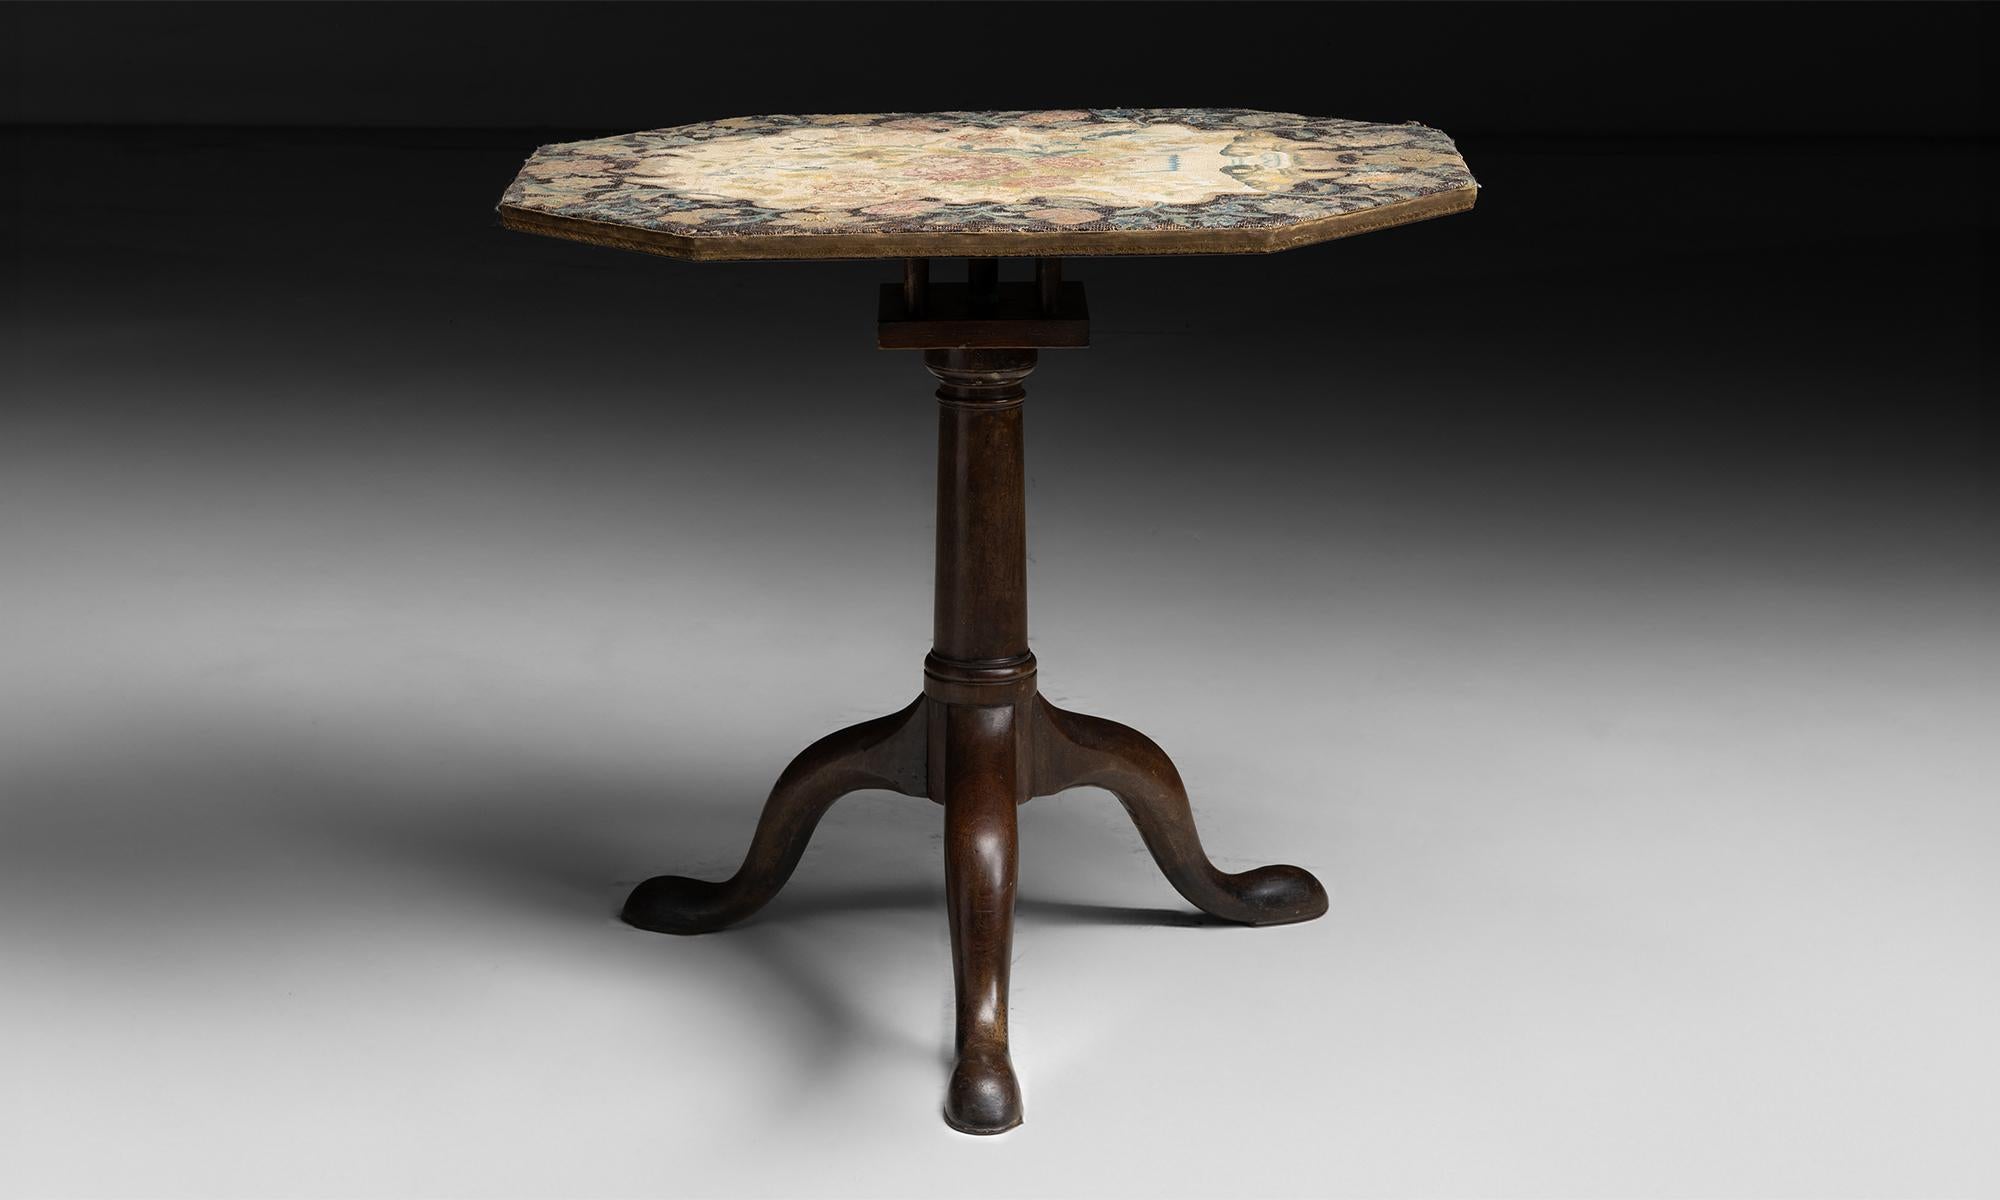 Needlework Table

England circa 1770

George III era tilt top table constructed in mahogany with needlework top.

32”w x 24.5”d x 29.5”h